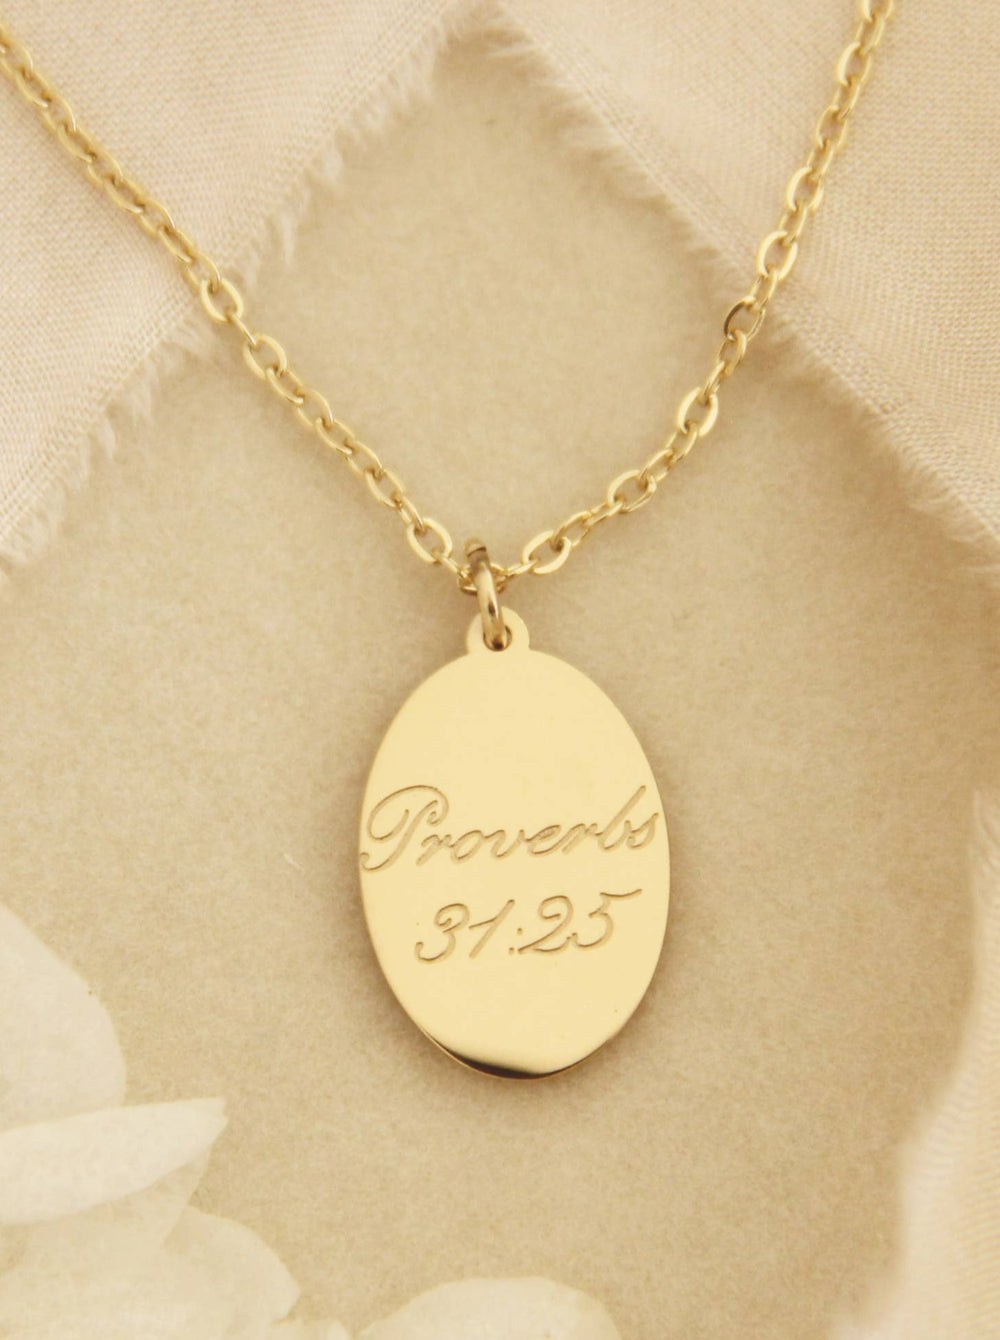 Proverbs 31 Necklace | Strength and dignity are her clothing | Gold Christian necklace